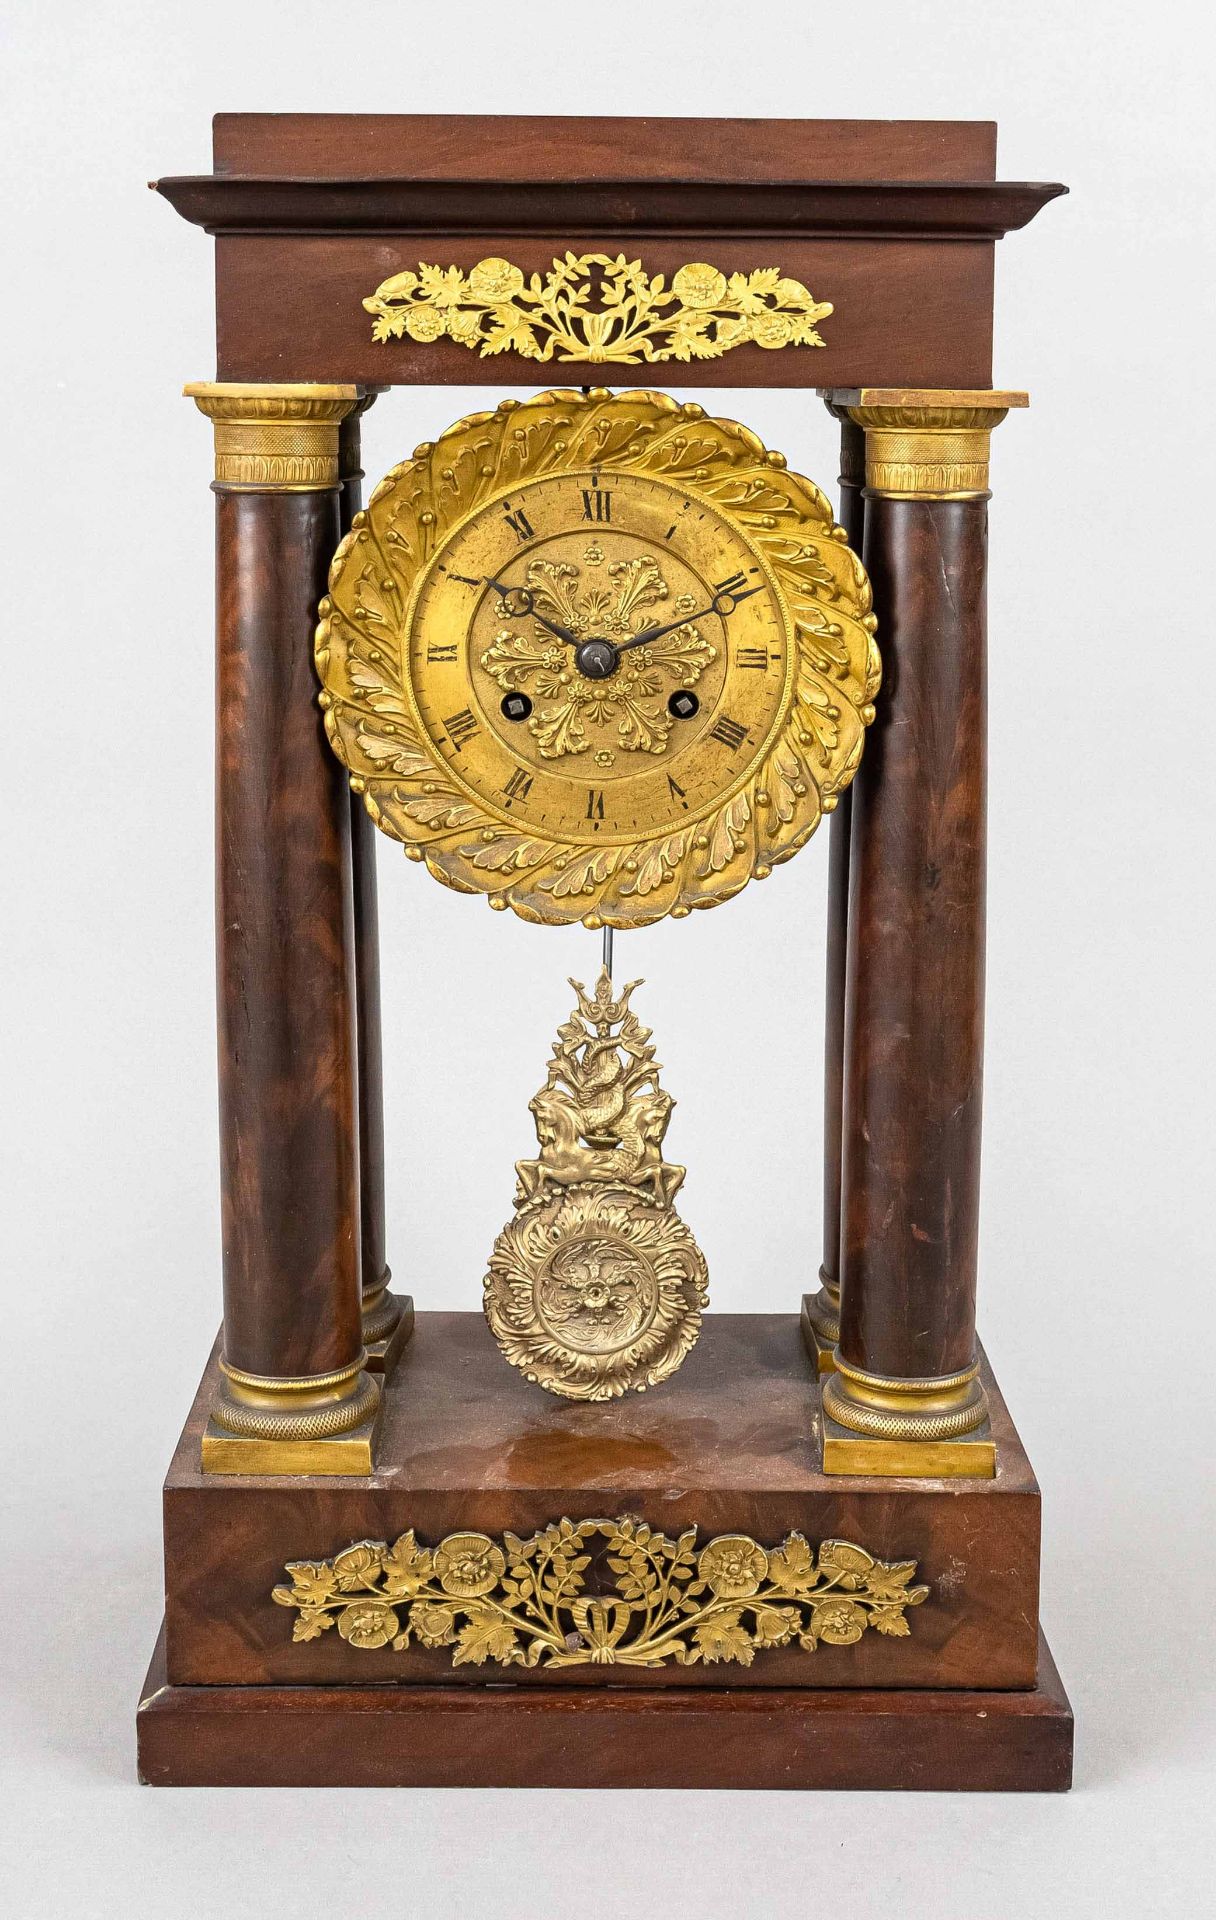 Portal clock root wood, 2nd half of 19th century, with gilded bases and capitals, solid brass dial